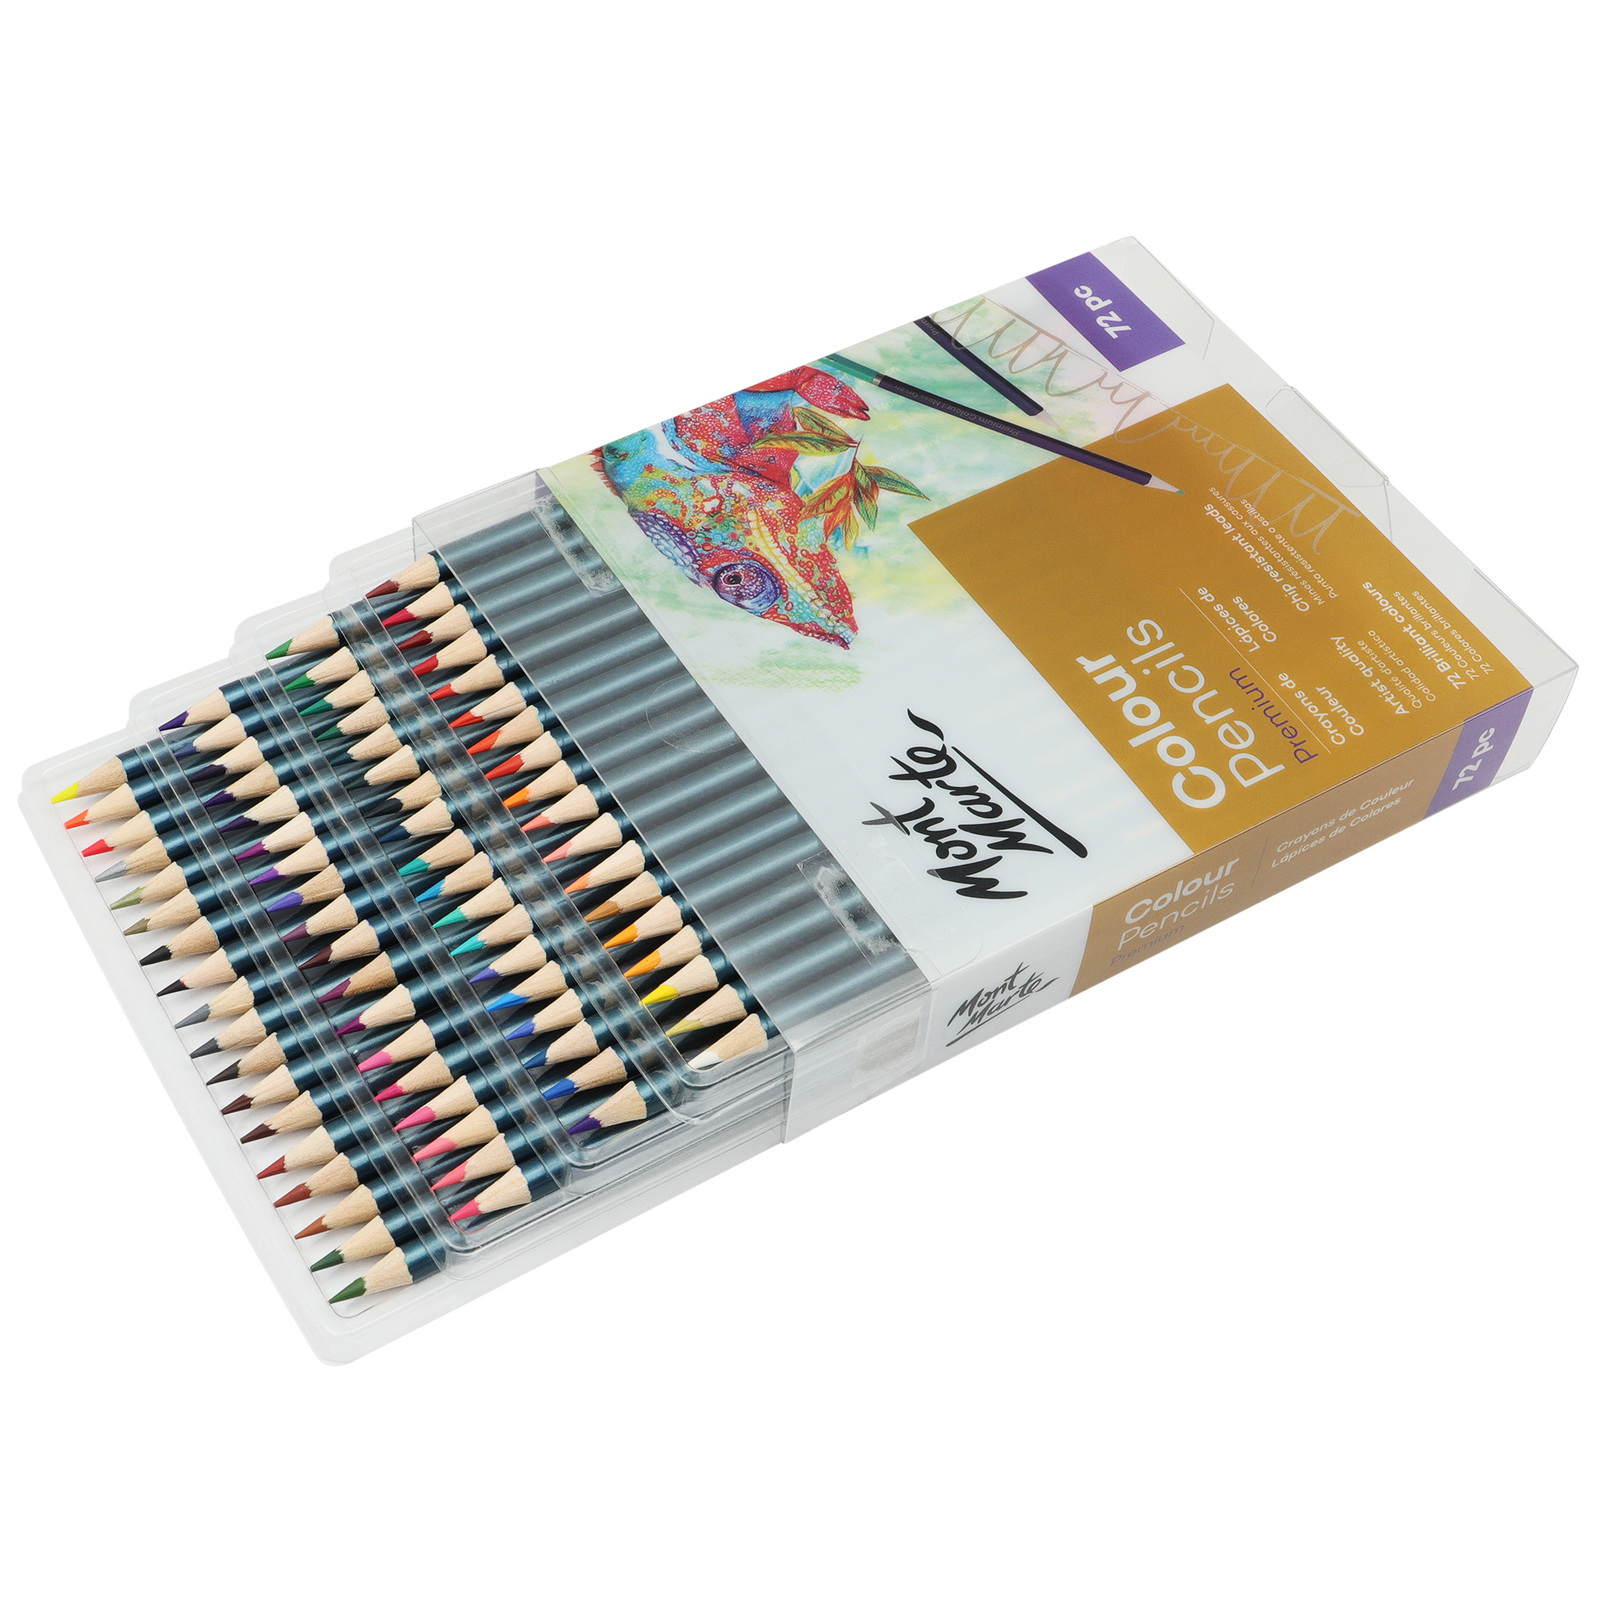 72 Piece Colored Pencil Set in Display Tin